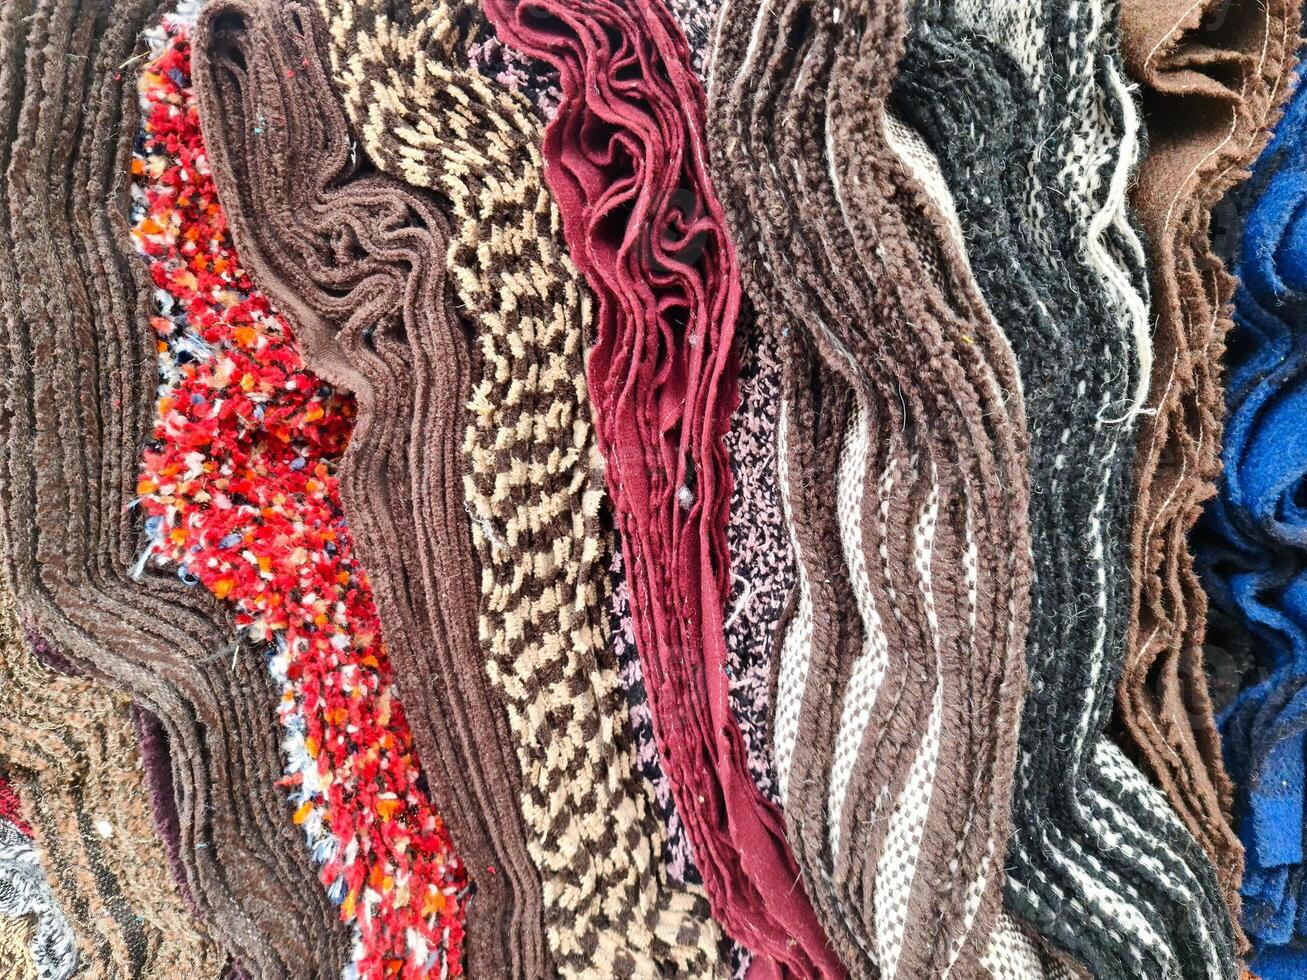 Samples of cloth and fabrics in different colors photo